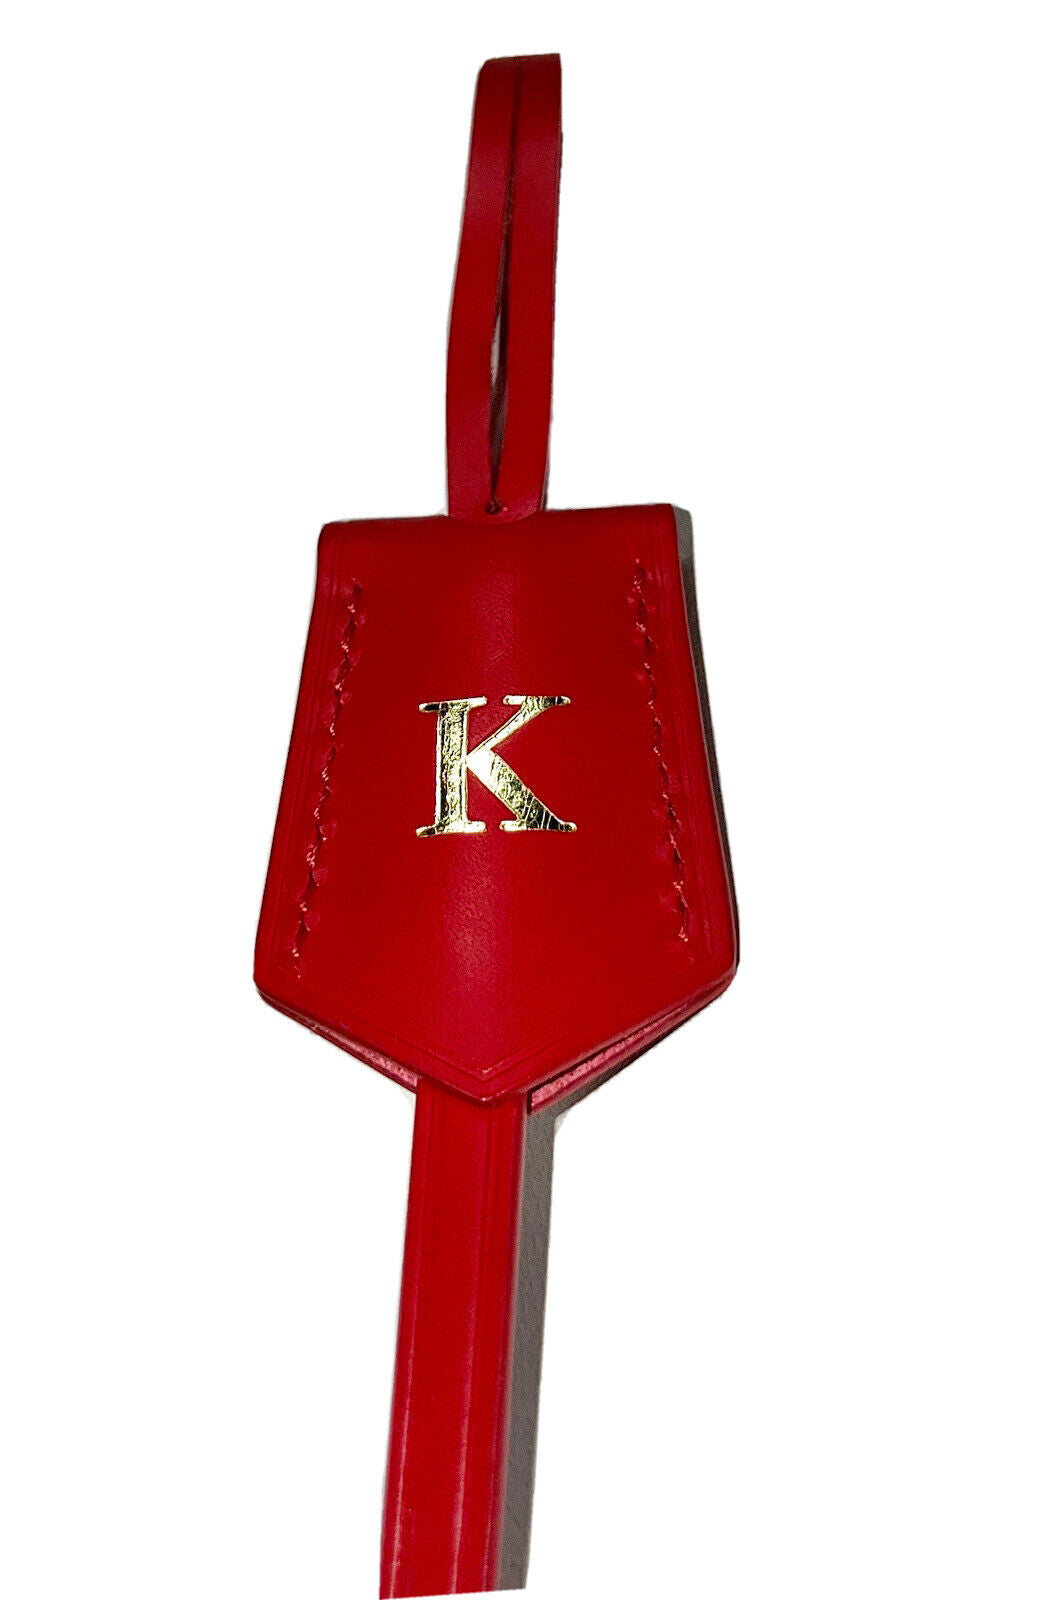 Louis Vuitton Red Clochette Tag Key Holder Bell w/ K Golden Initial Bag Charm